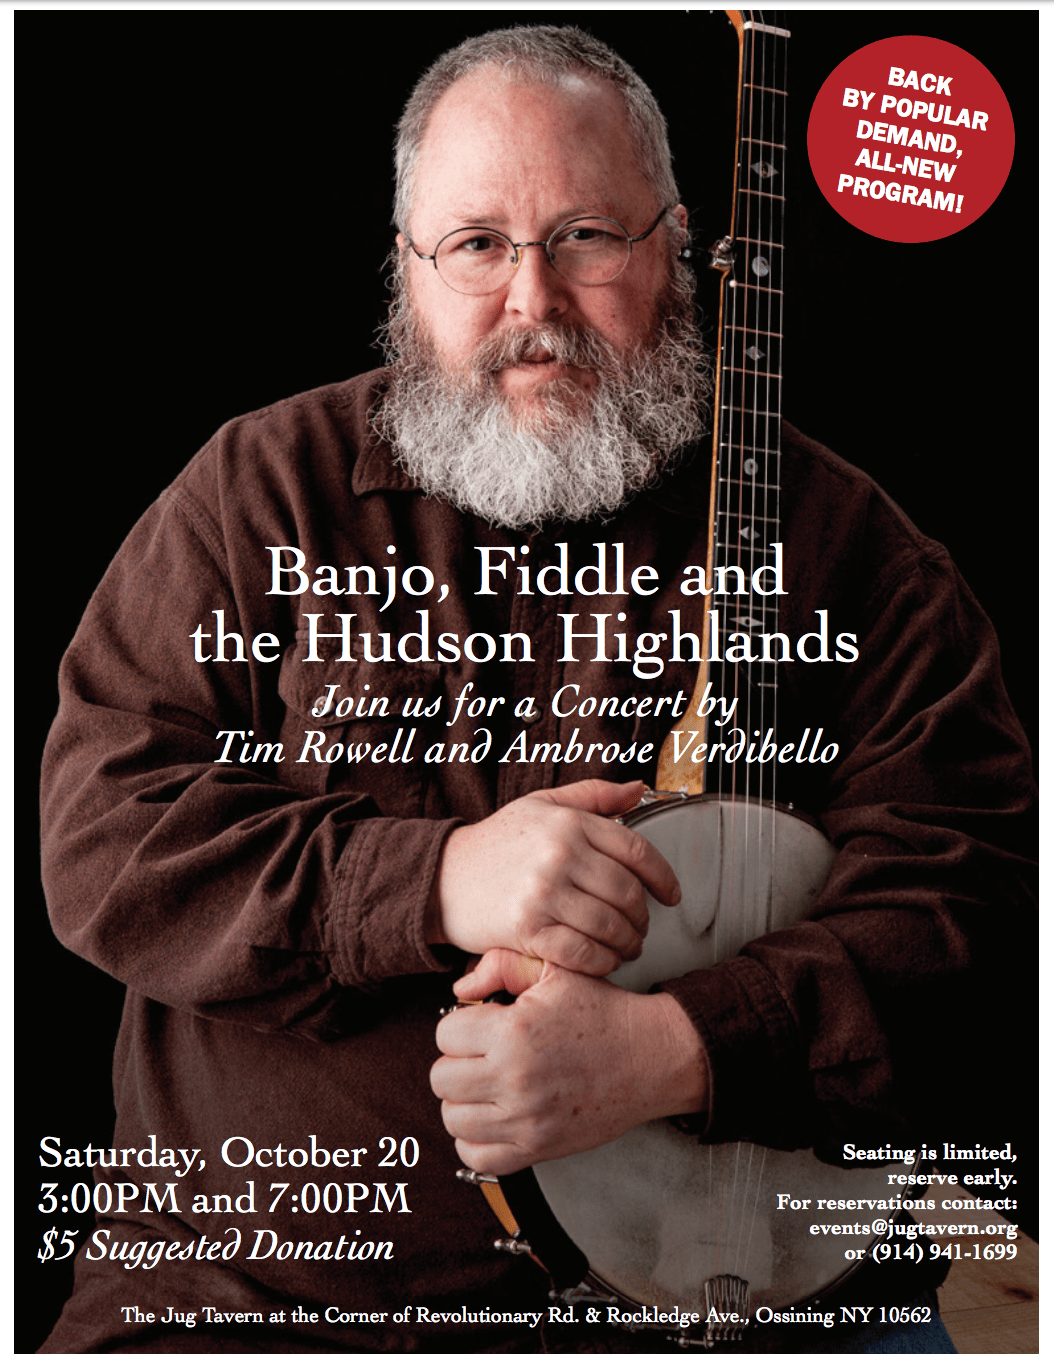 Banjo, Fiddle and the Hudson Highlands: A Concert by Tim Rowell and Ambrose Verdibello